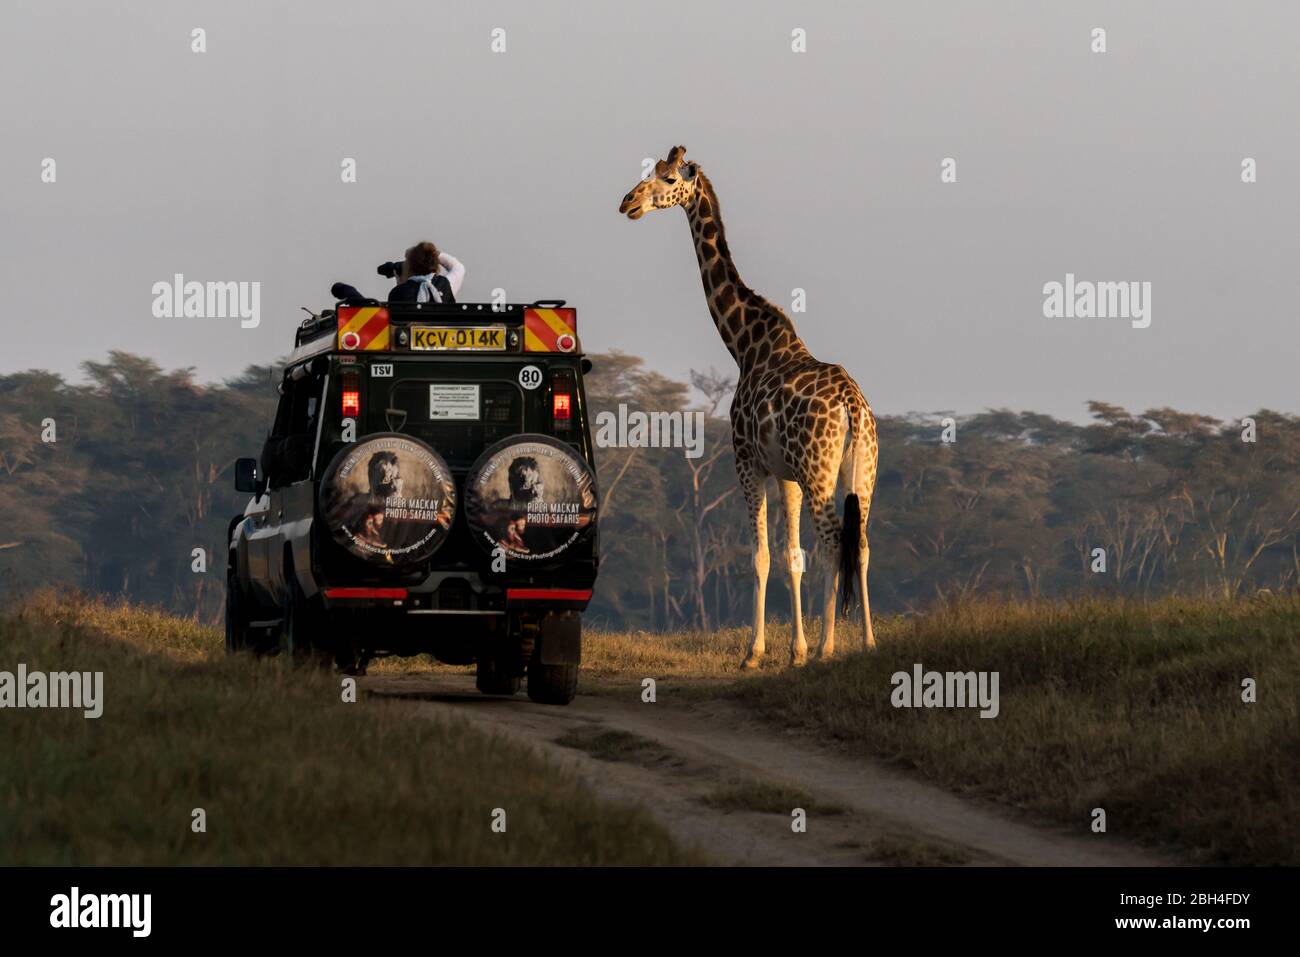 # Turnaround! A giraffe gets up close to the safari jeep while the photographer, unaware, shoots in the opposite direction Stock Photo